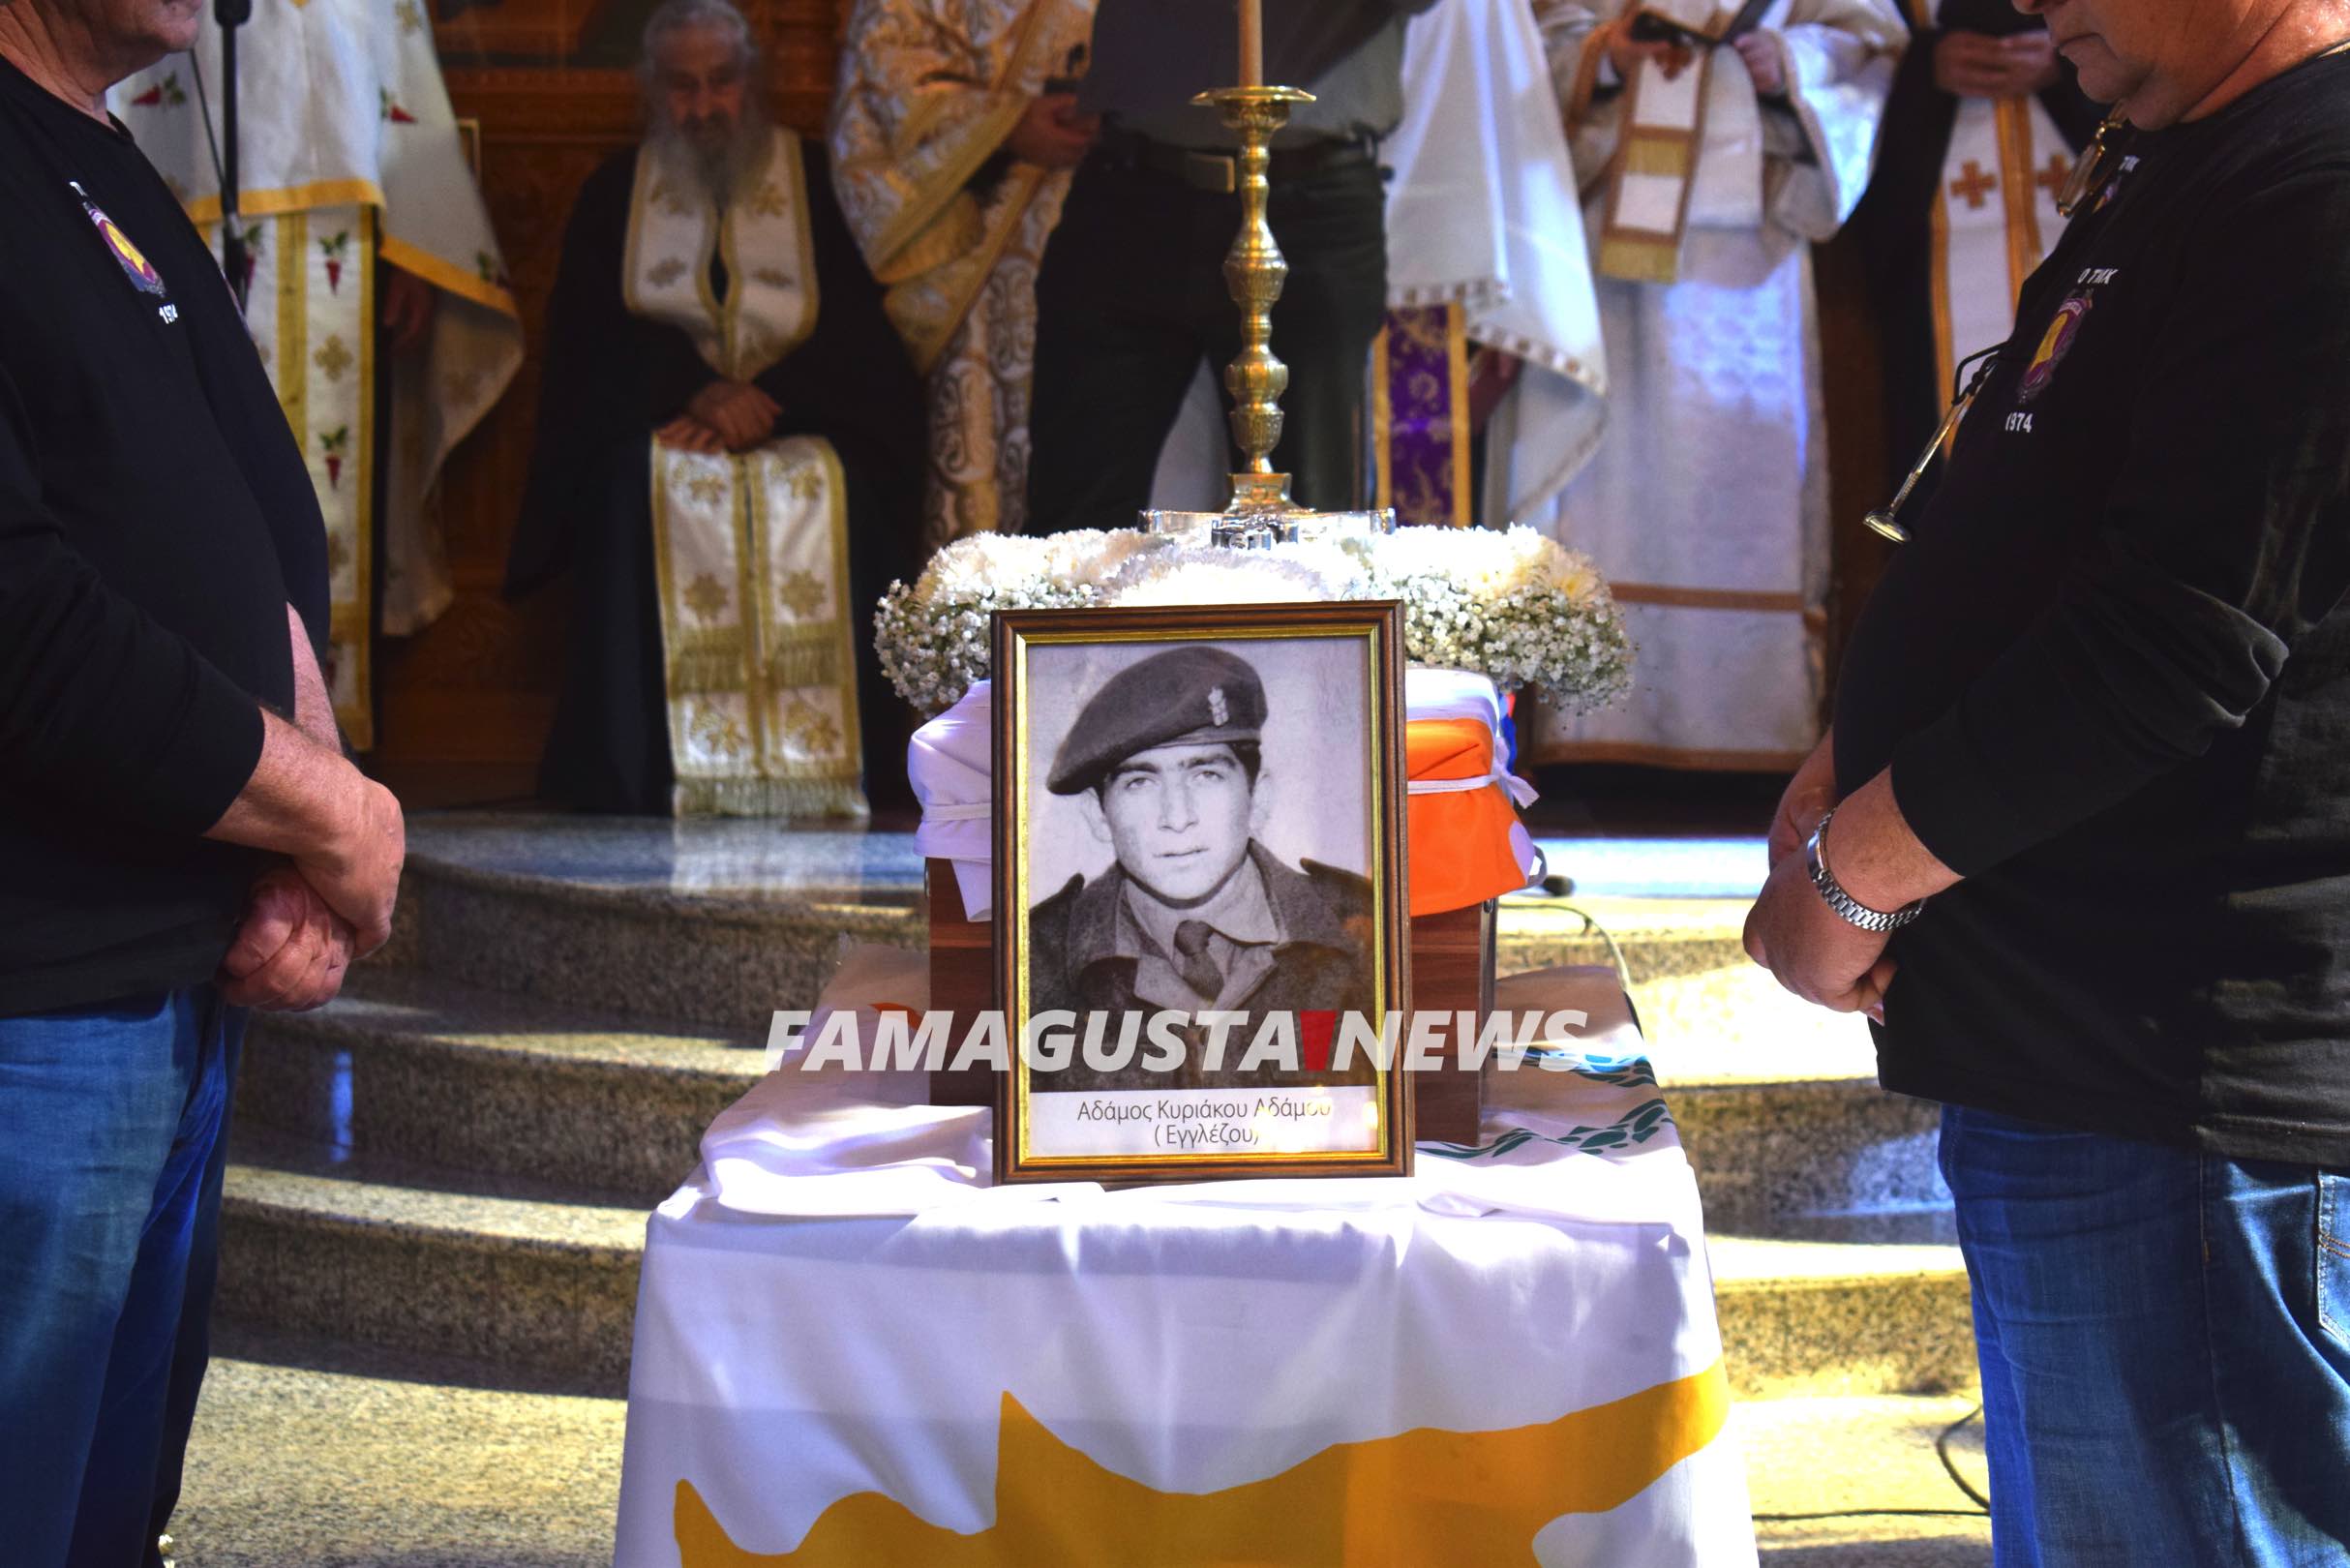 DSC 5589 001 exclusive, Missing, Funeral, Funeral of Missing, Nea Famagusta